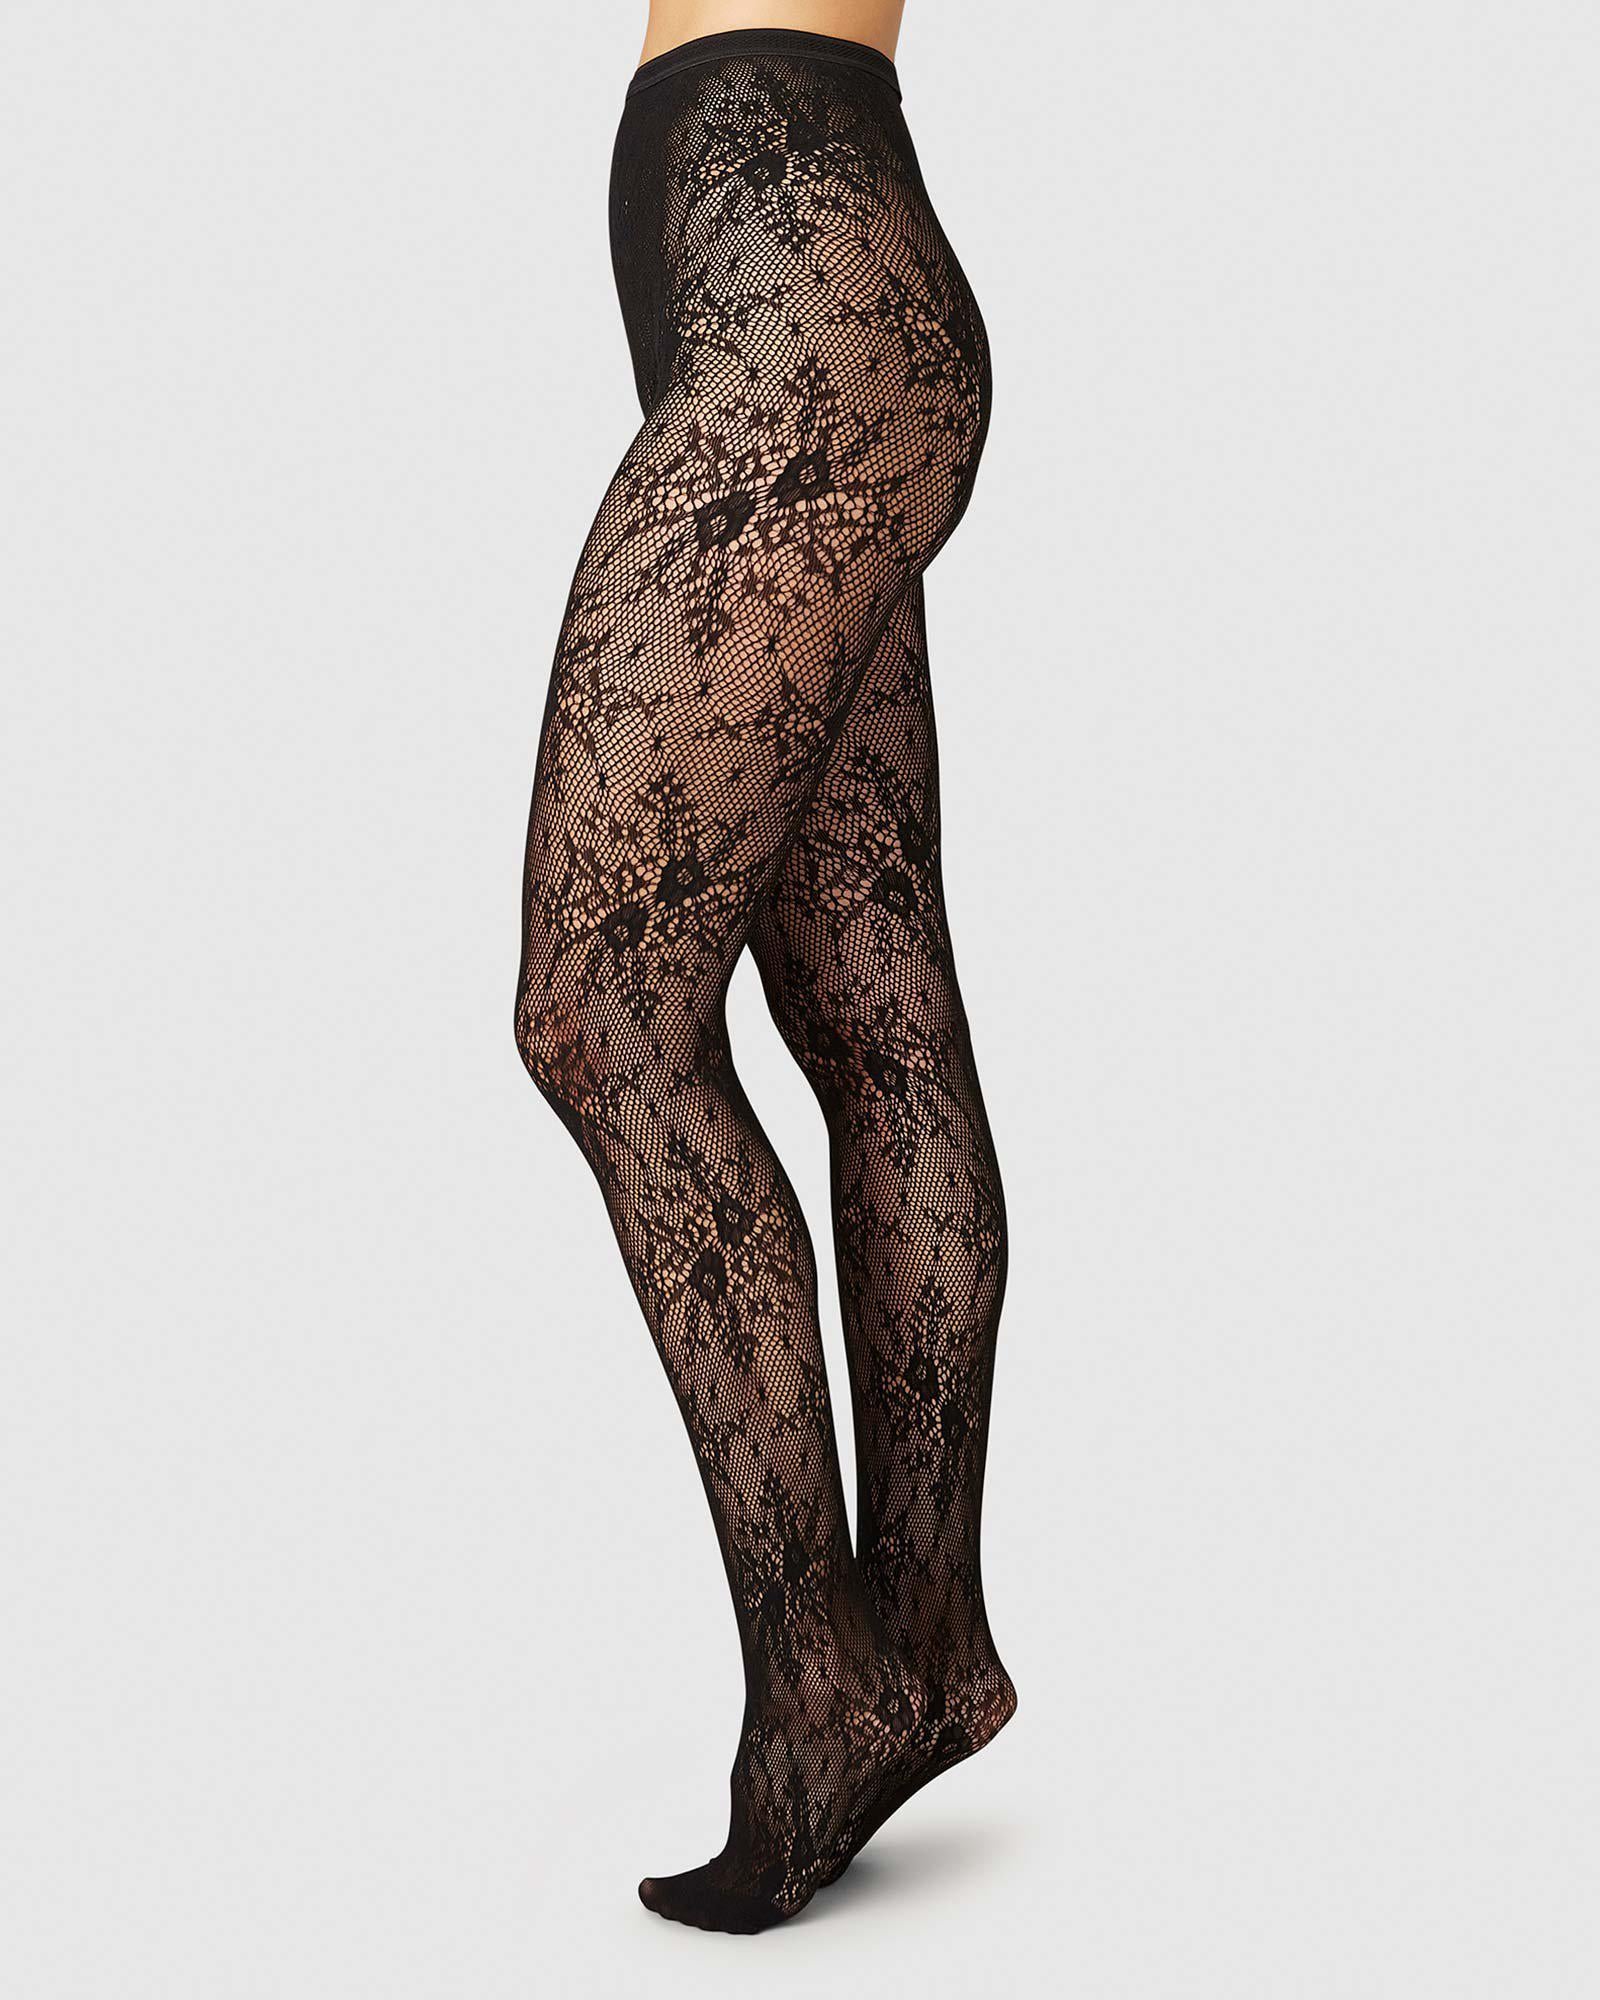 Black Floral Lace Stockings With Lace Top